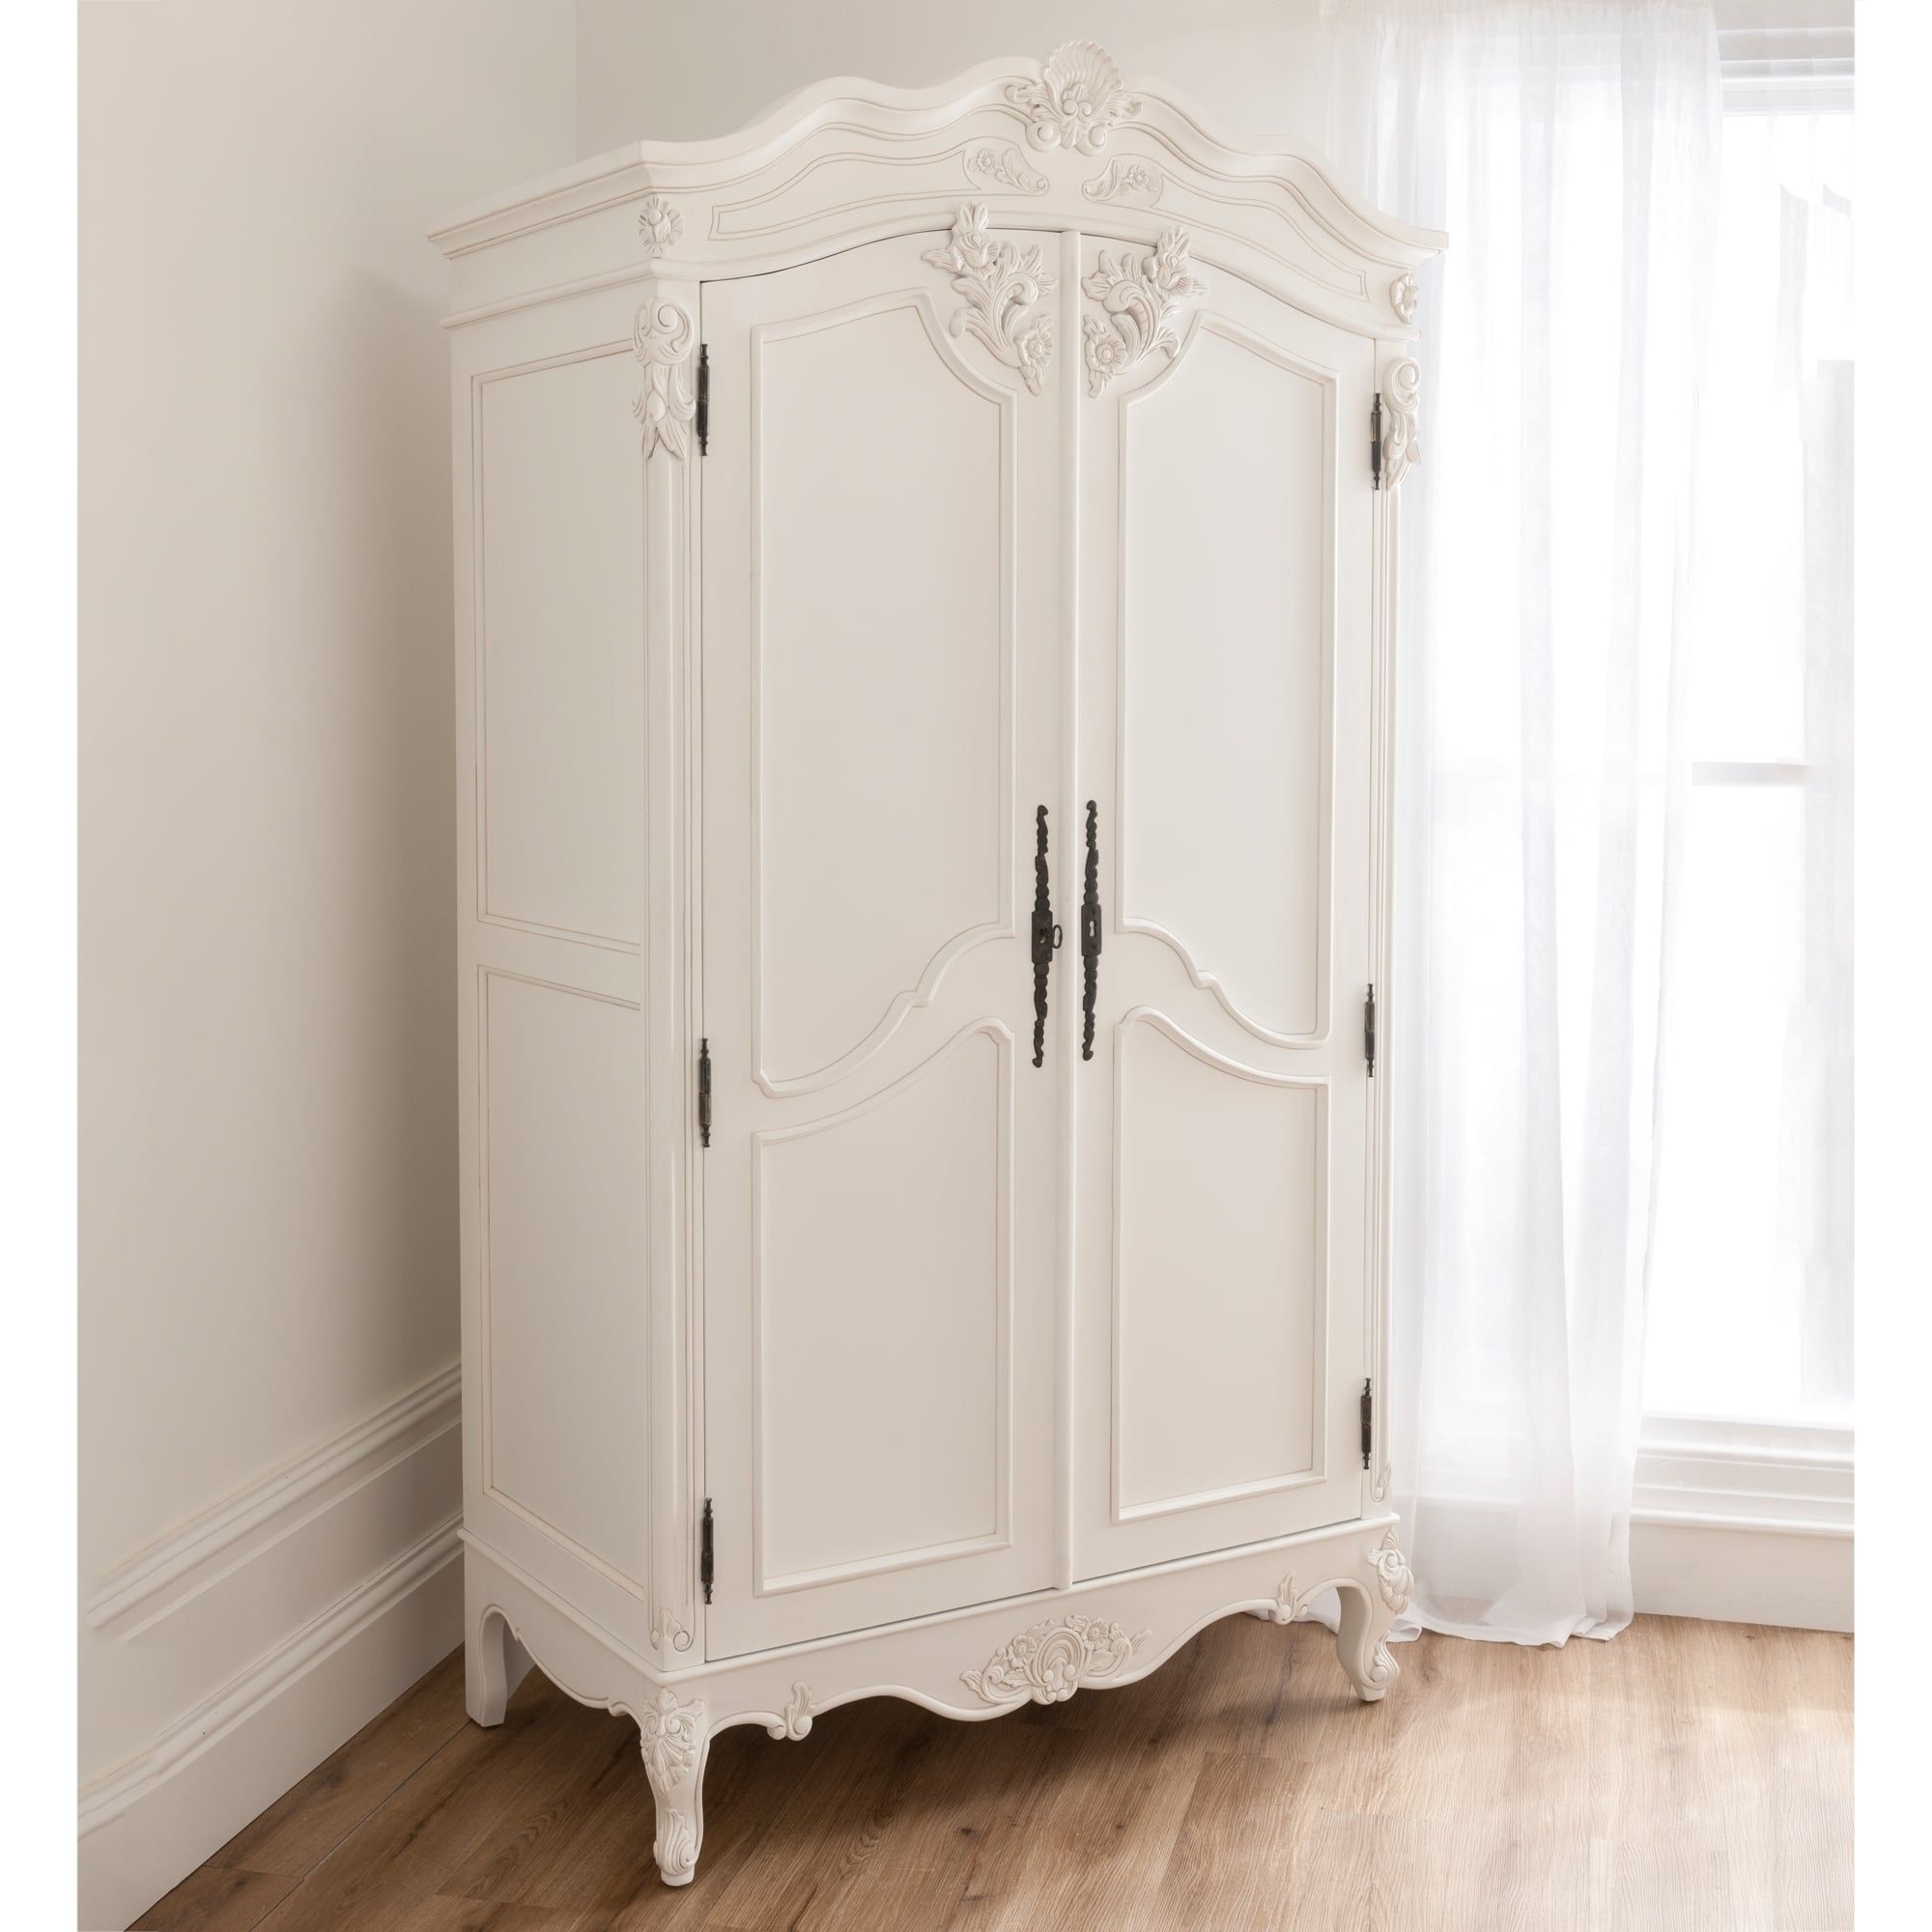 Most Recently Released Baroque Antique French Wardrobe Is Available Online From Inside White French Armoire Wardrobes (View 4 of 15)